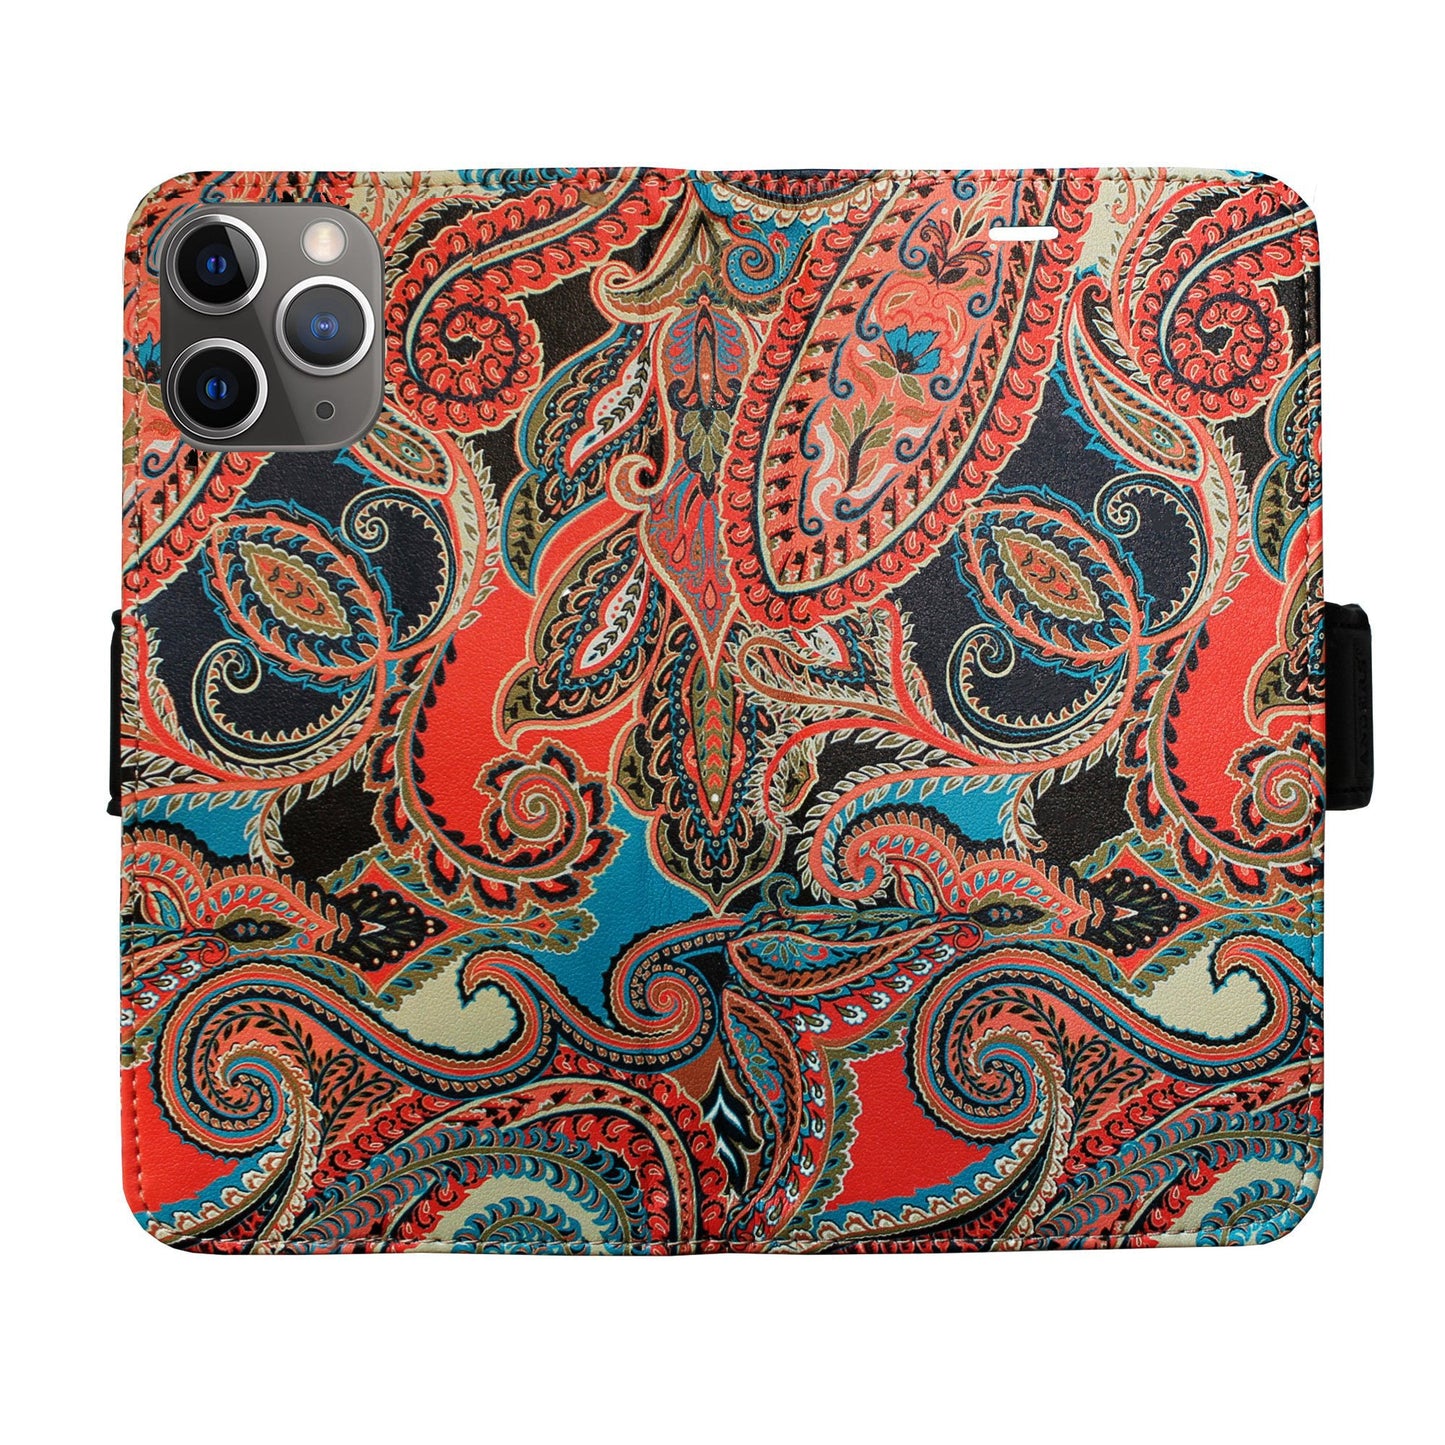 Paisley Victor Case for iPhone 11 Pro